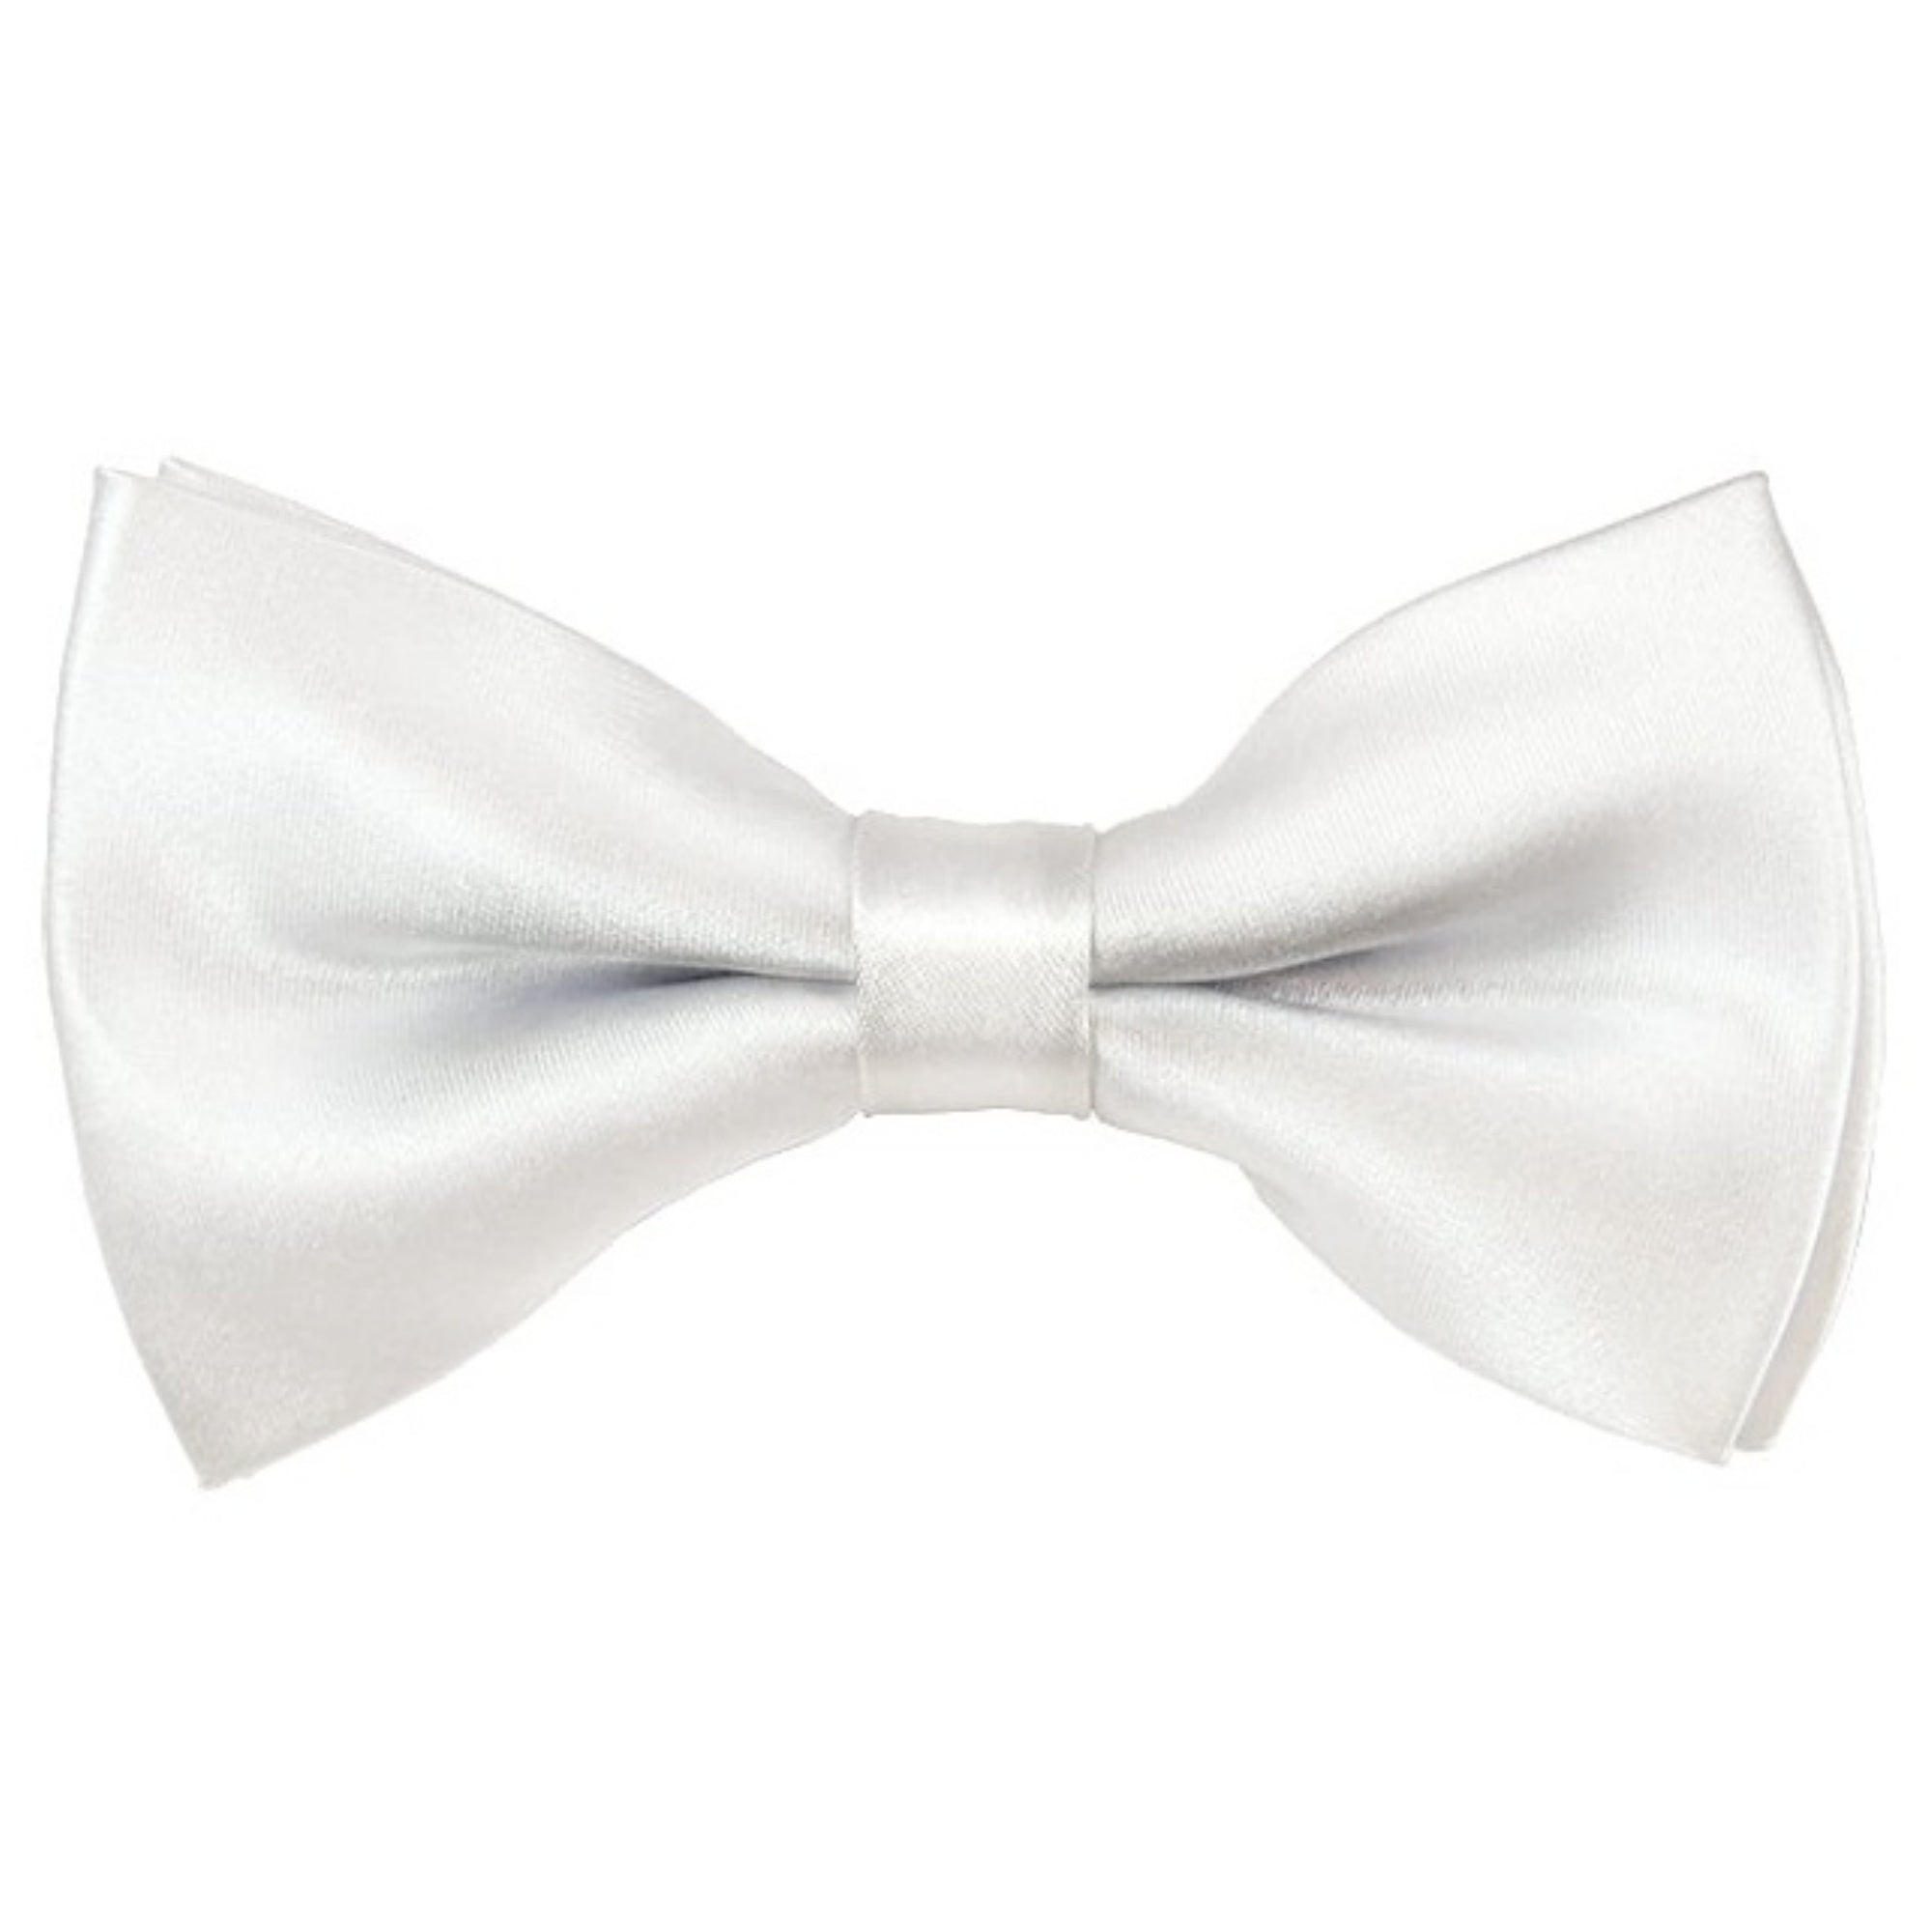 TheDapperTie Men's Solid Color 2.5 W And 4.5 L Inch Pre-Tied adjustable Bow Ties Men's Solid Color Bow Tie TheDapperTie White  